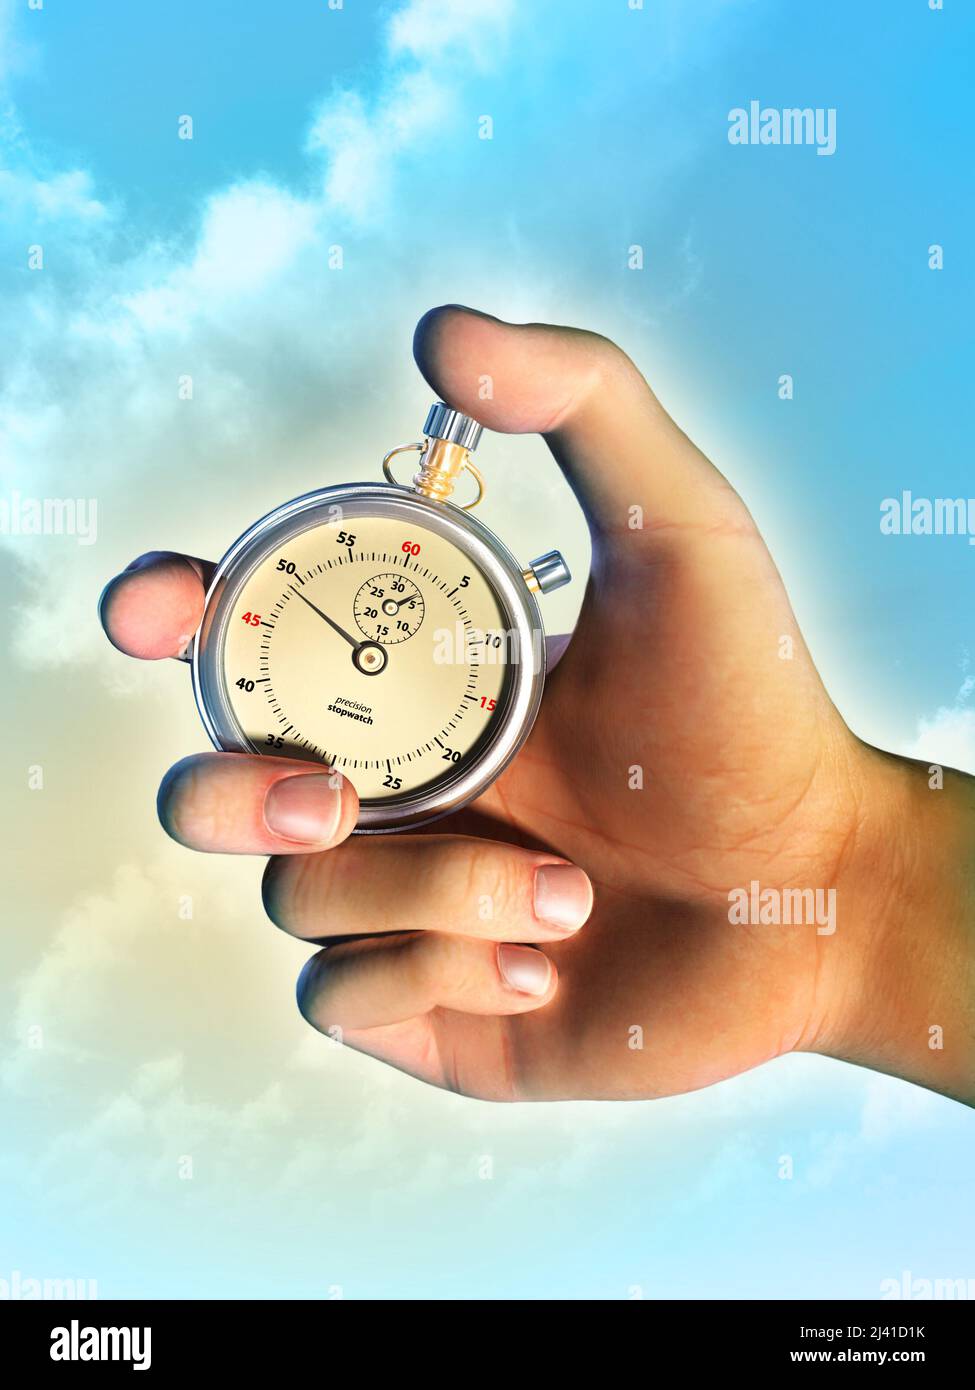 Male hand holding a stopwatch over a bright sky background. Digital illustration. Stock Photo